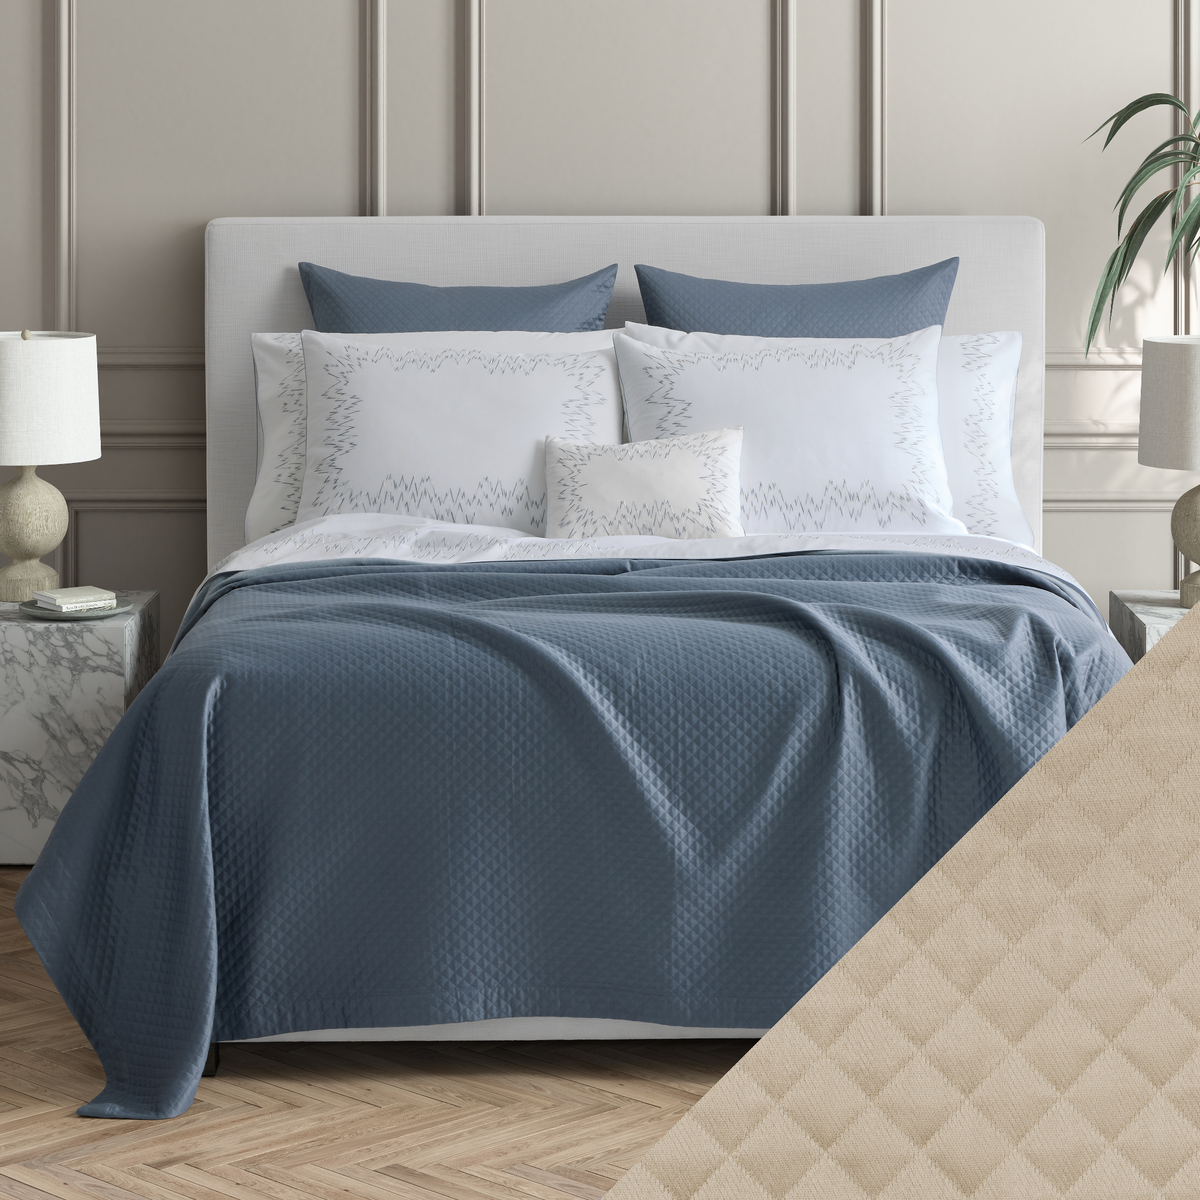 Full Bedding of Matouk Petra Collection with Dune Swatch Sample